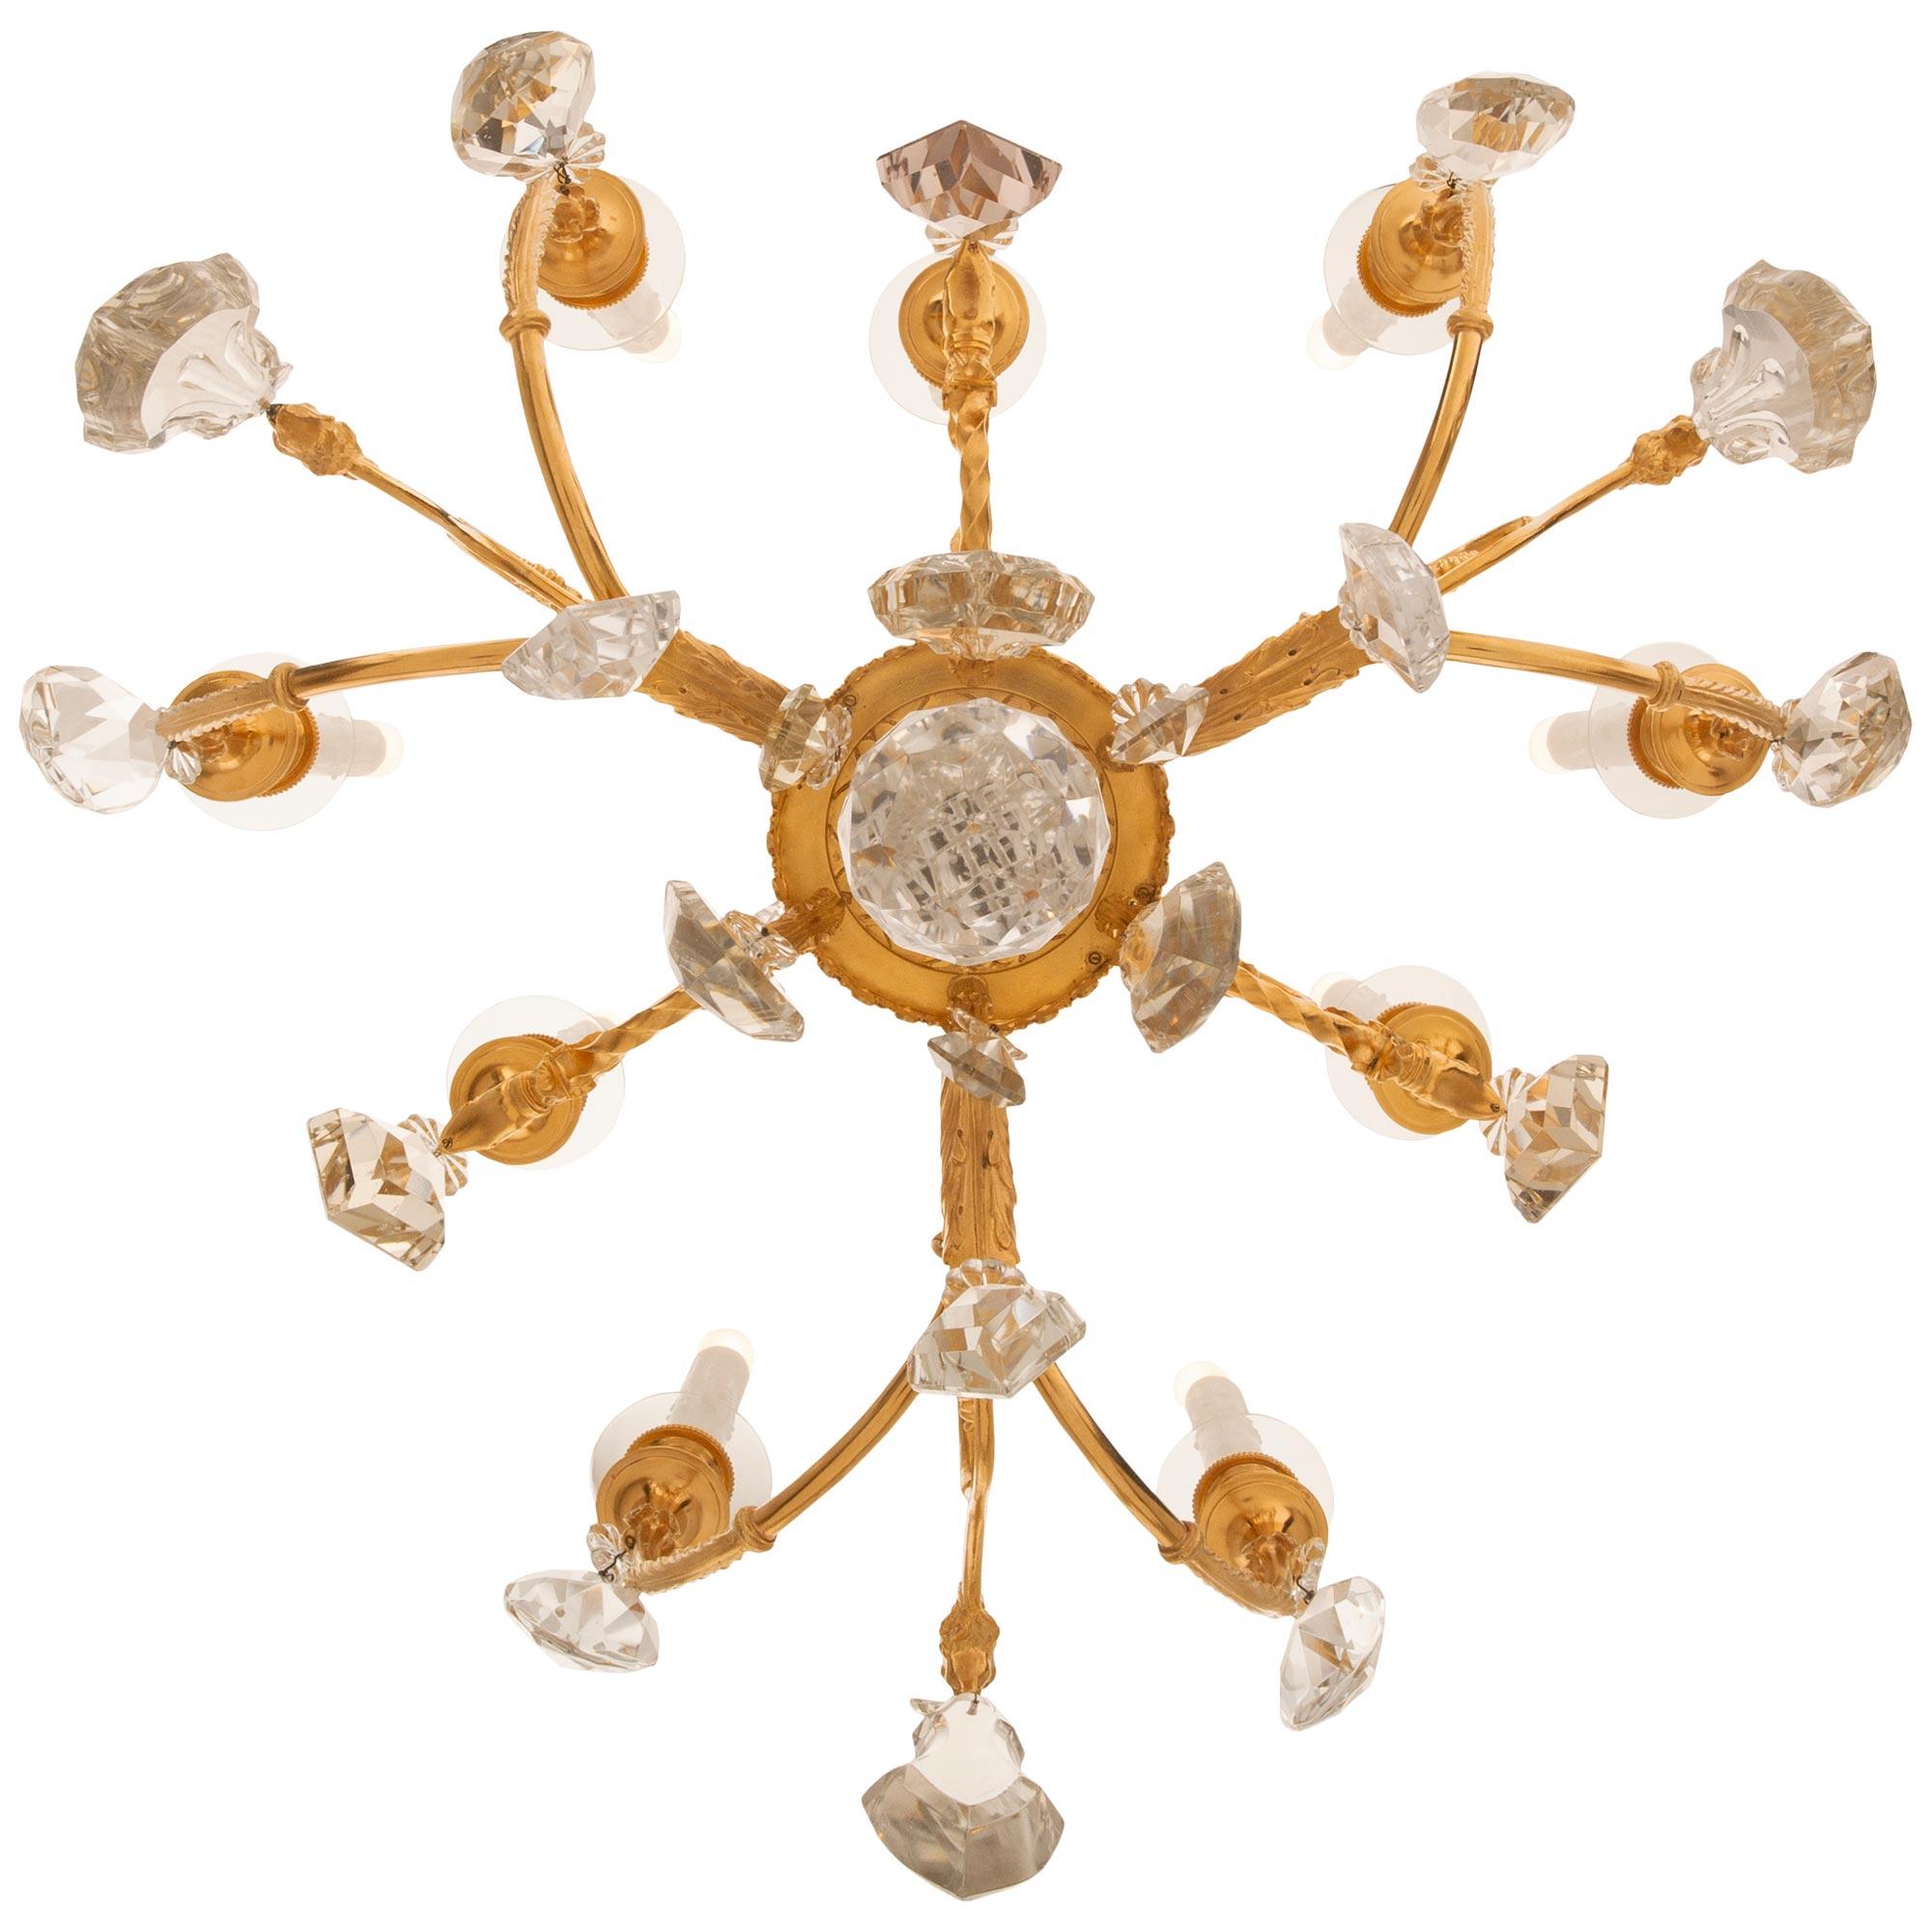 A very attractive French 19th century Belle Époque Period Louis XVI st. Ormolu and Baccarat crystal chandelier. The six arm, nine light chandelier is centered by a stunning facetted Baccarat crystal ball pendant below a charming berried finial. The